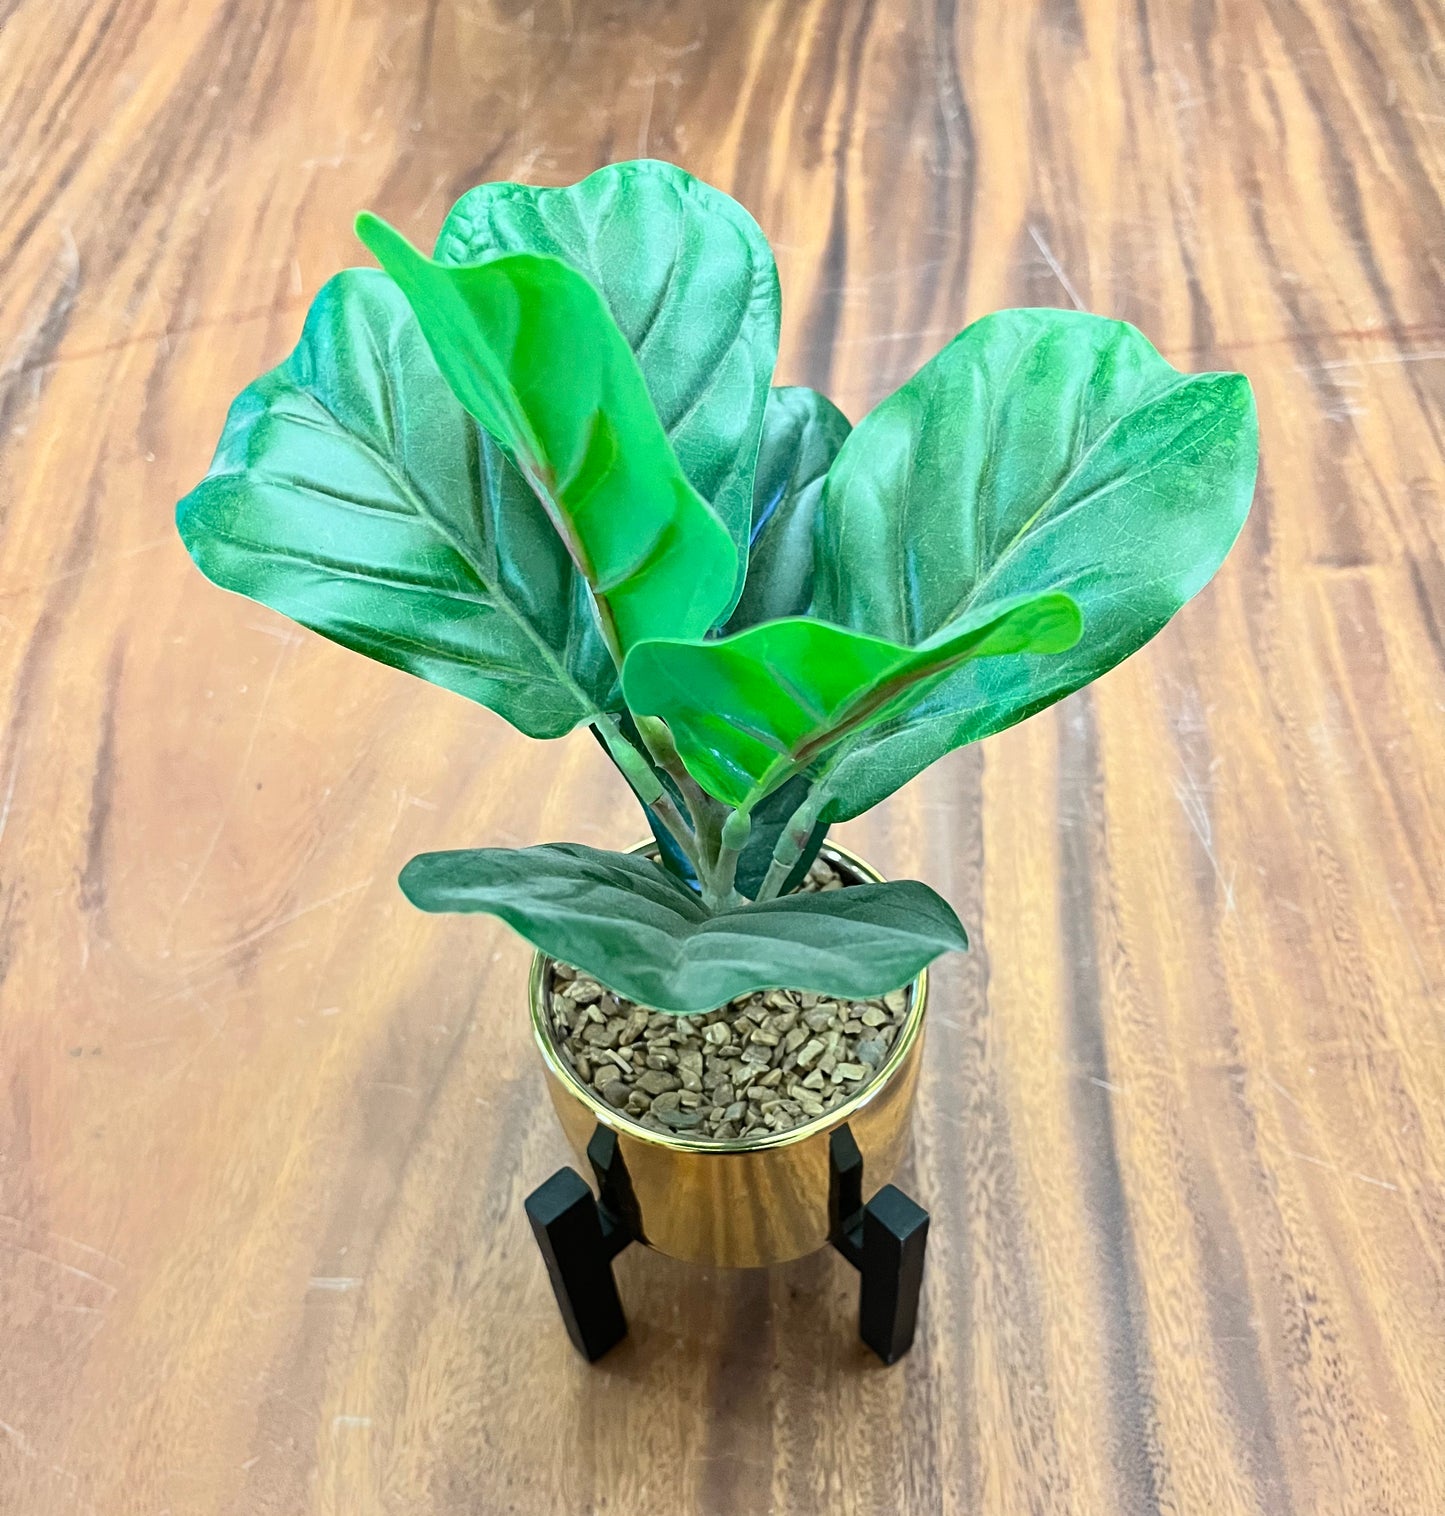 Silicon Valley: Gavin's Gold Potted Fake Plant